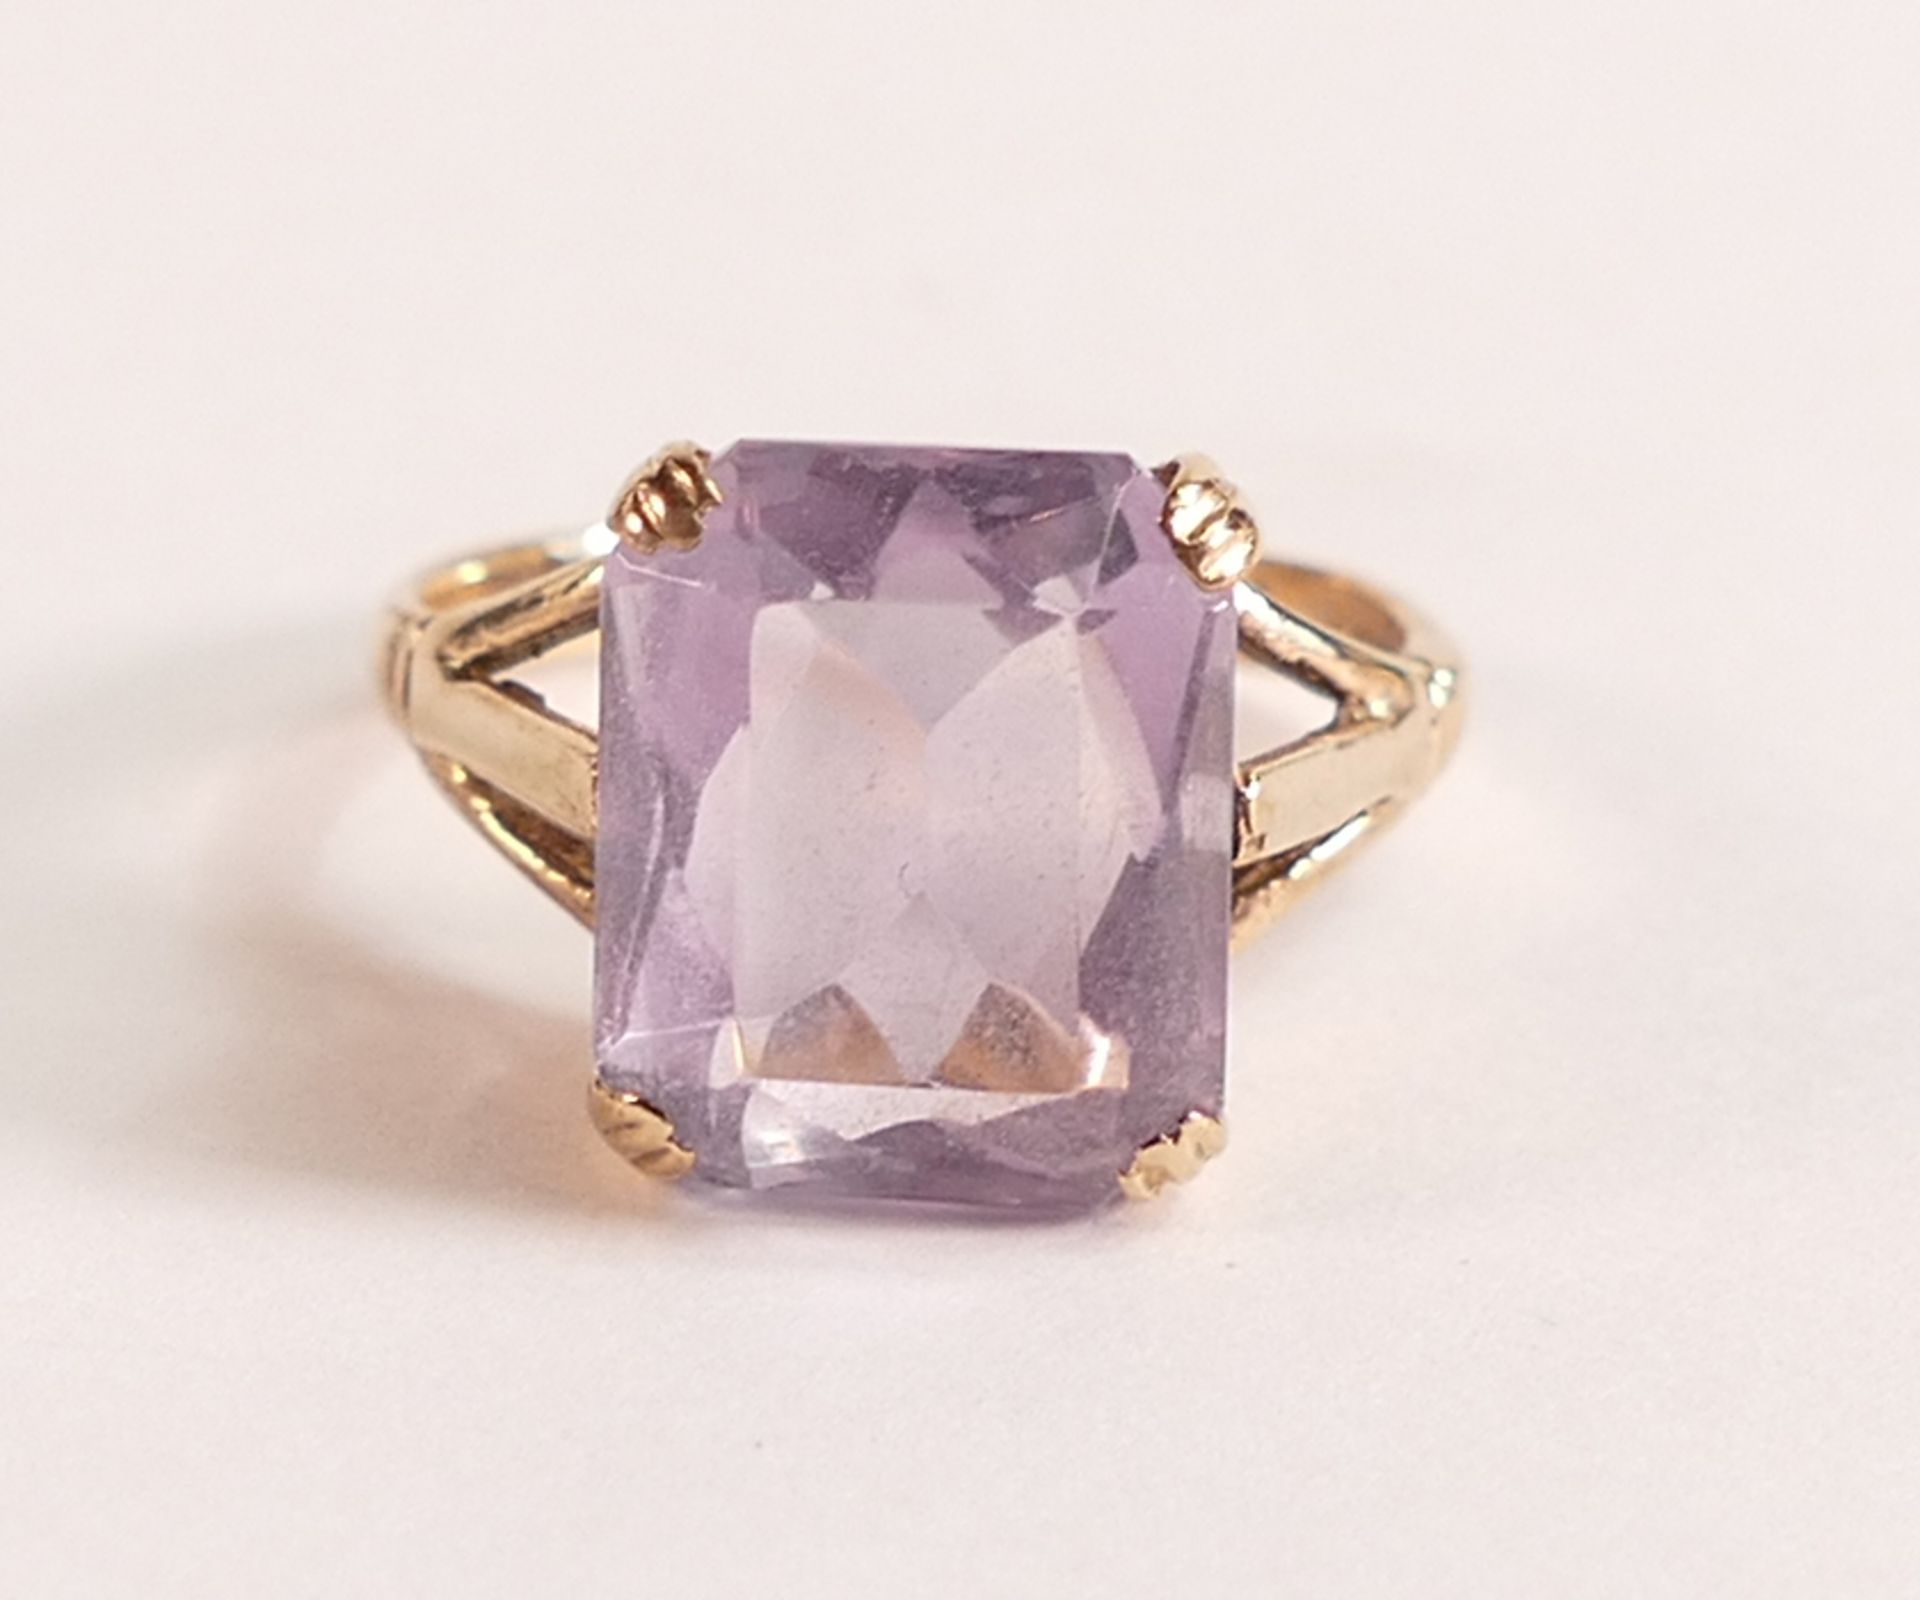 9ct Gold Lavender Quartz Ring - The ring mount is solid 9ct yellow gold, hallmarked 375 and